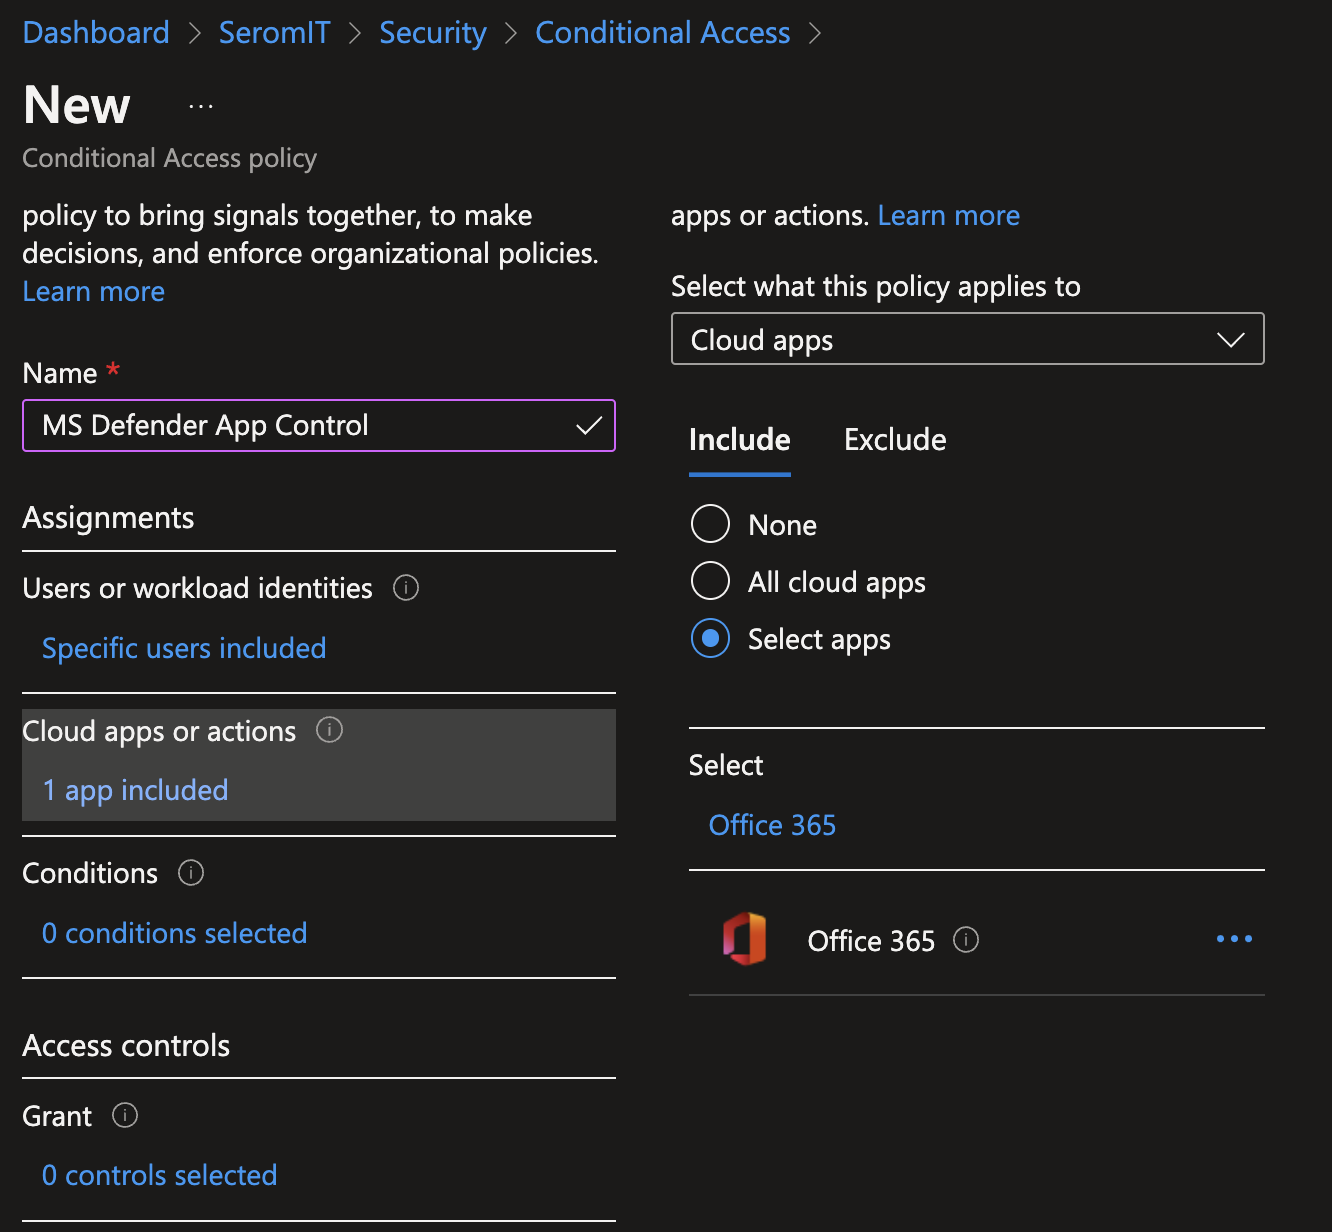 In Cloud Apps or Actions, select Office 365